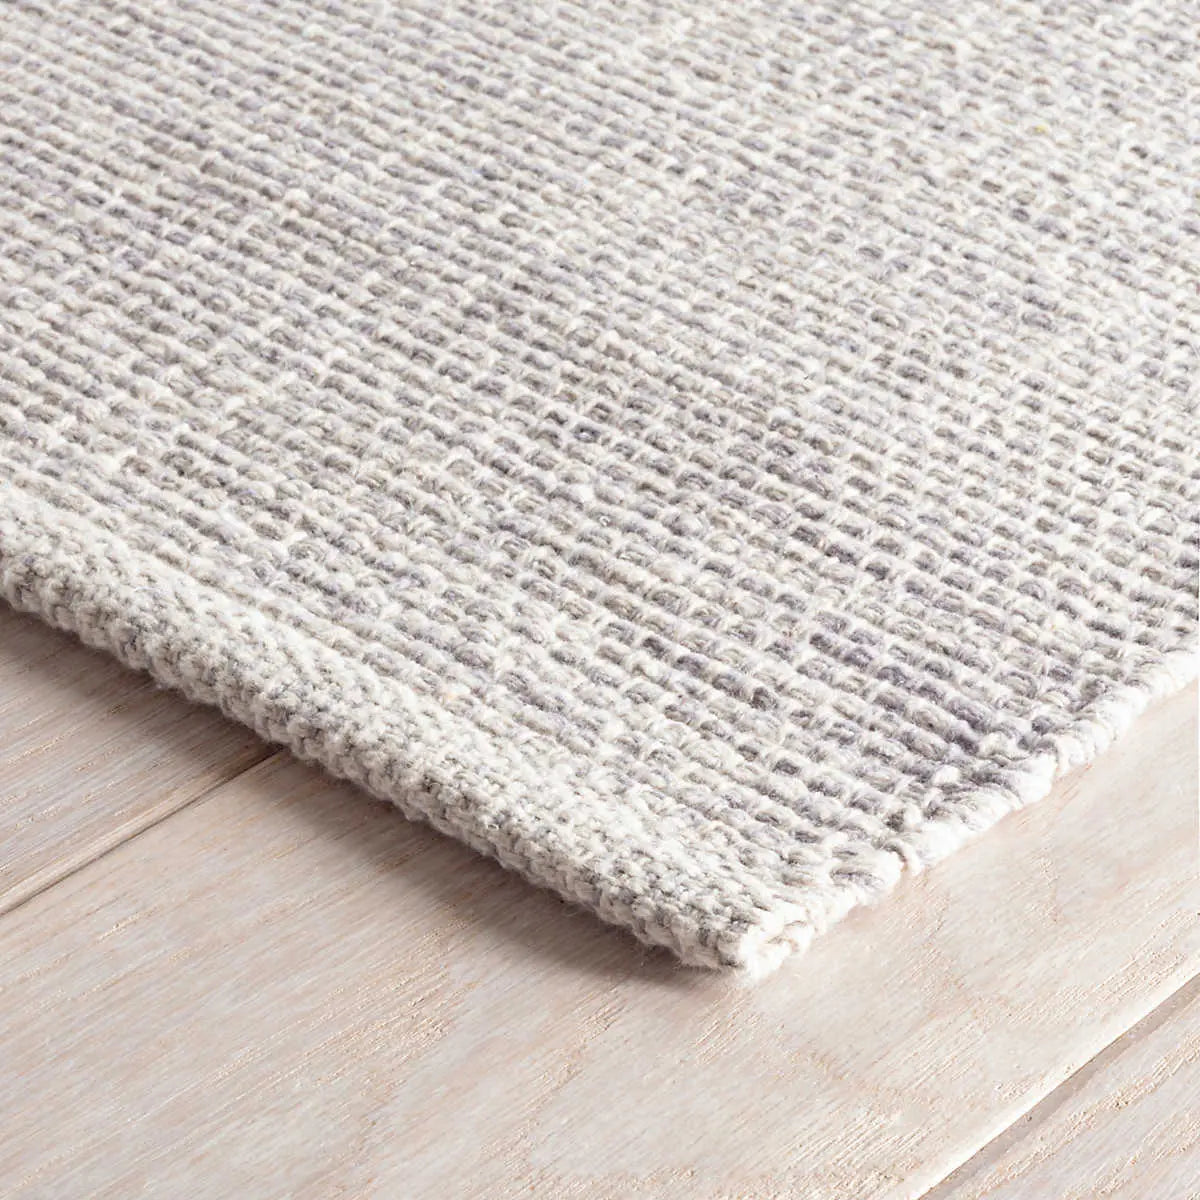 Marled Grey Woven Cotton Rug - Home Smith